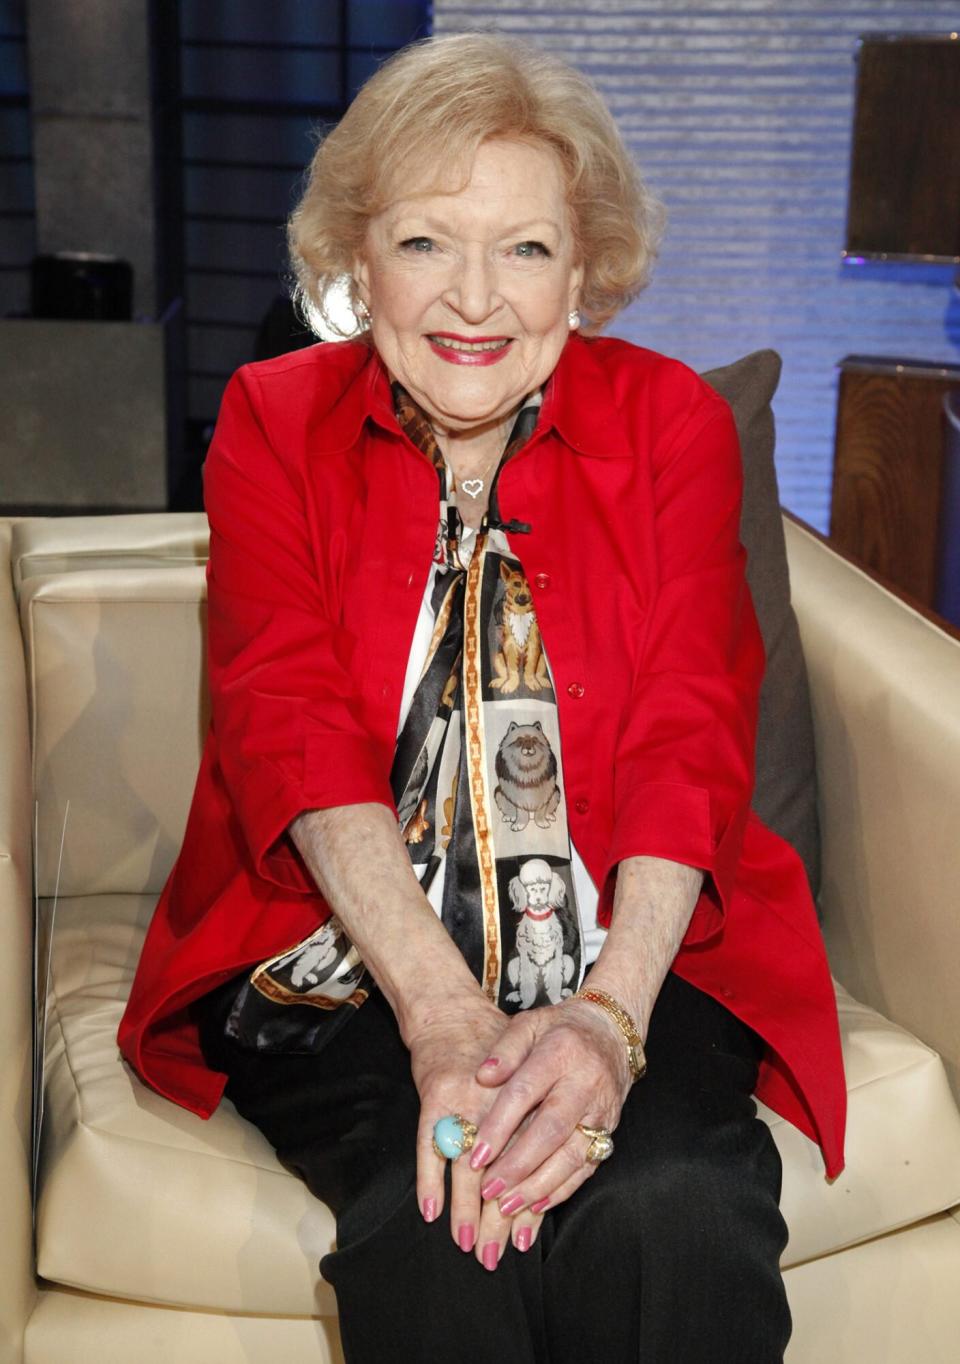 Things We're Looking Forward to in 2022 - BETTY WHITE